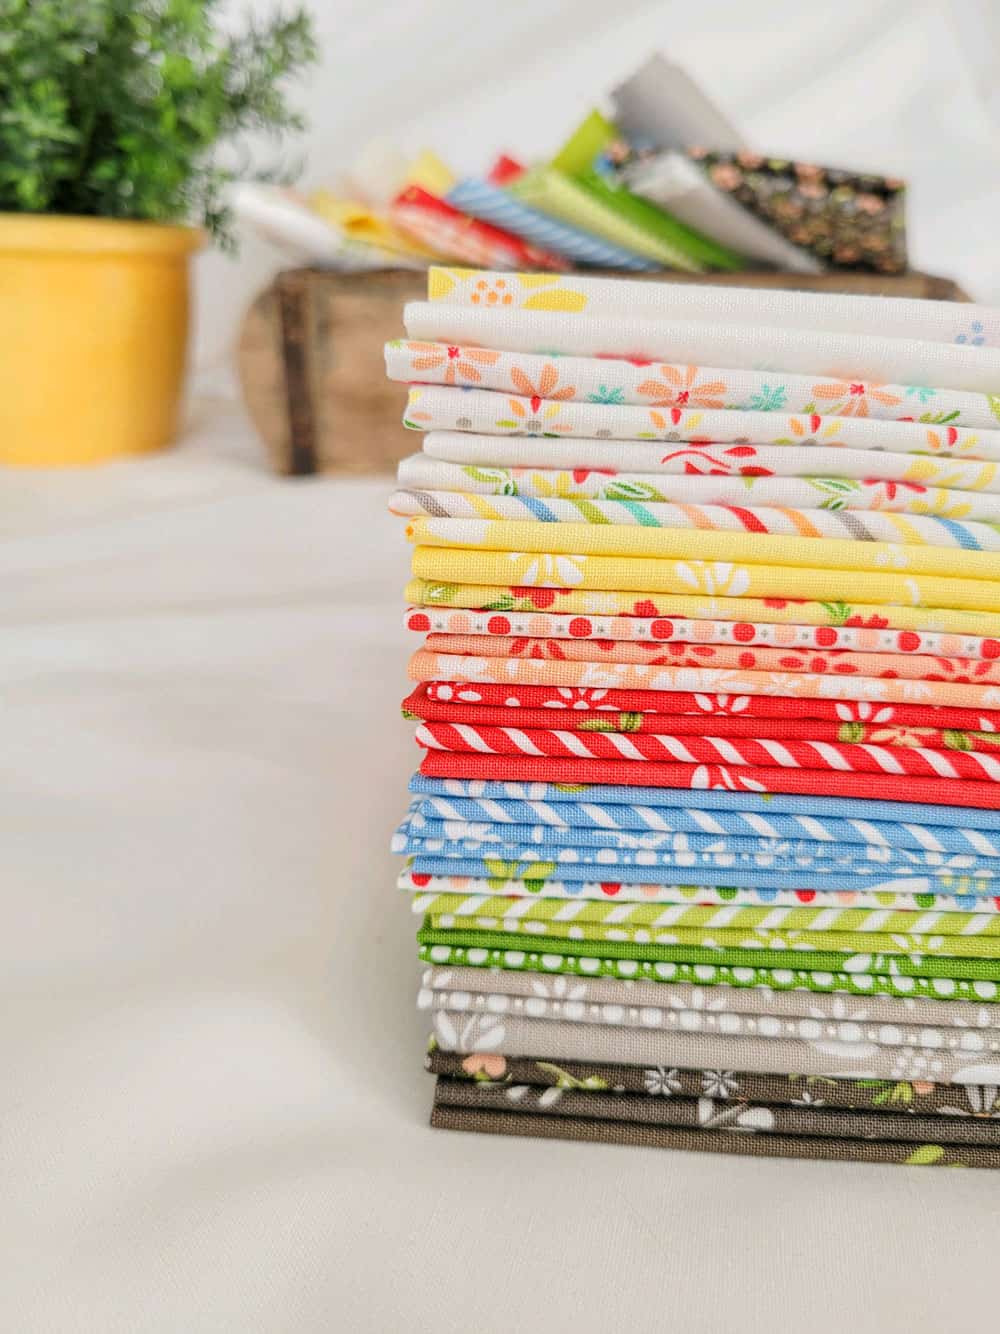 Introducing the Emma Fabric Collection by Sherri & Chelsi featured by Top US Quilt Blog, A Quilting Life